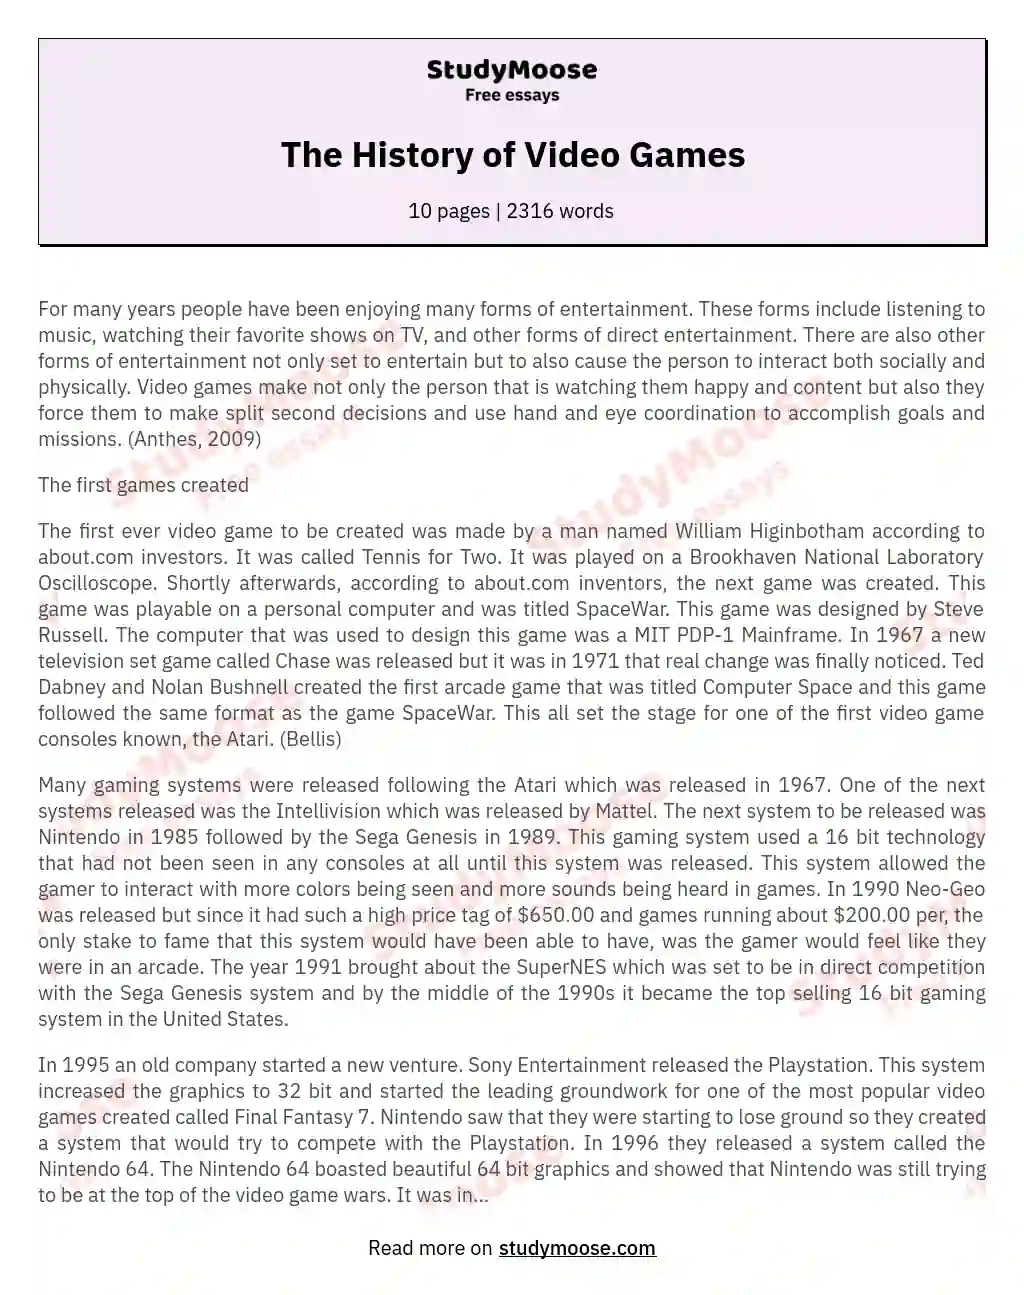 The History of Video Games essay